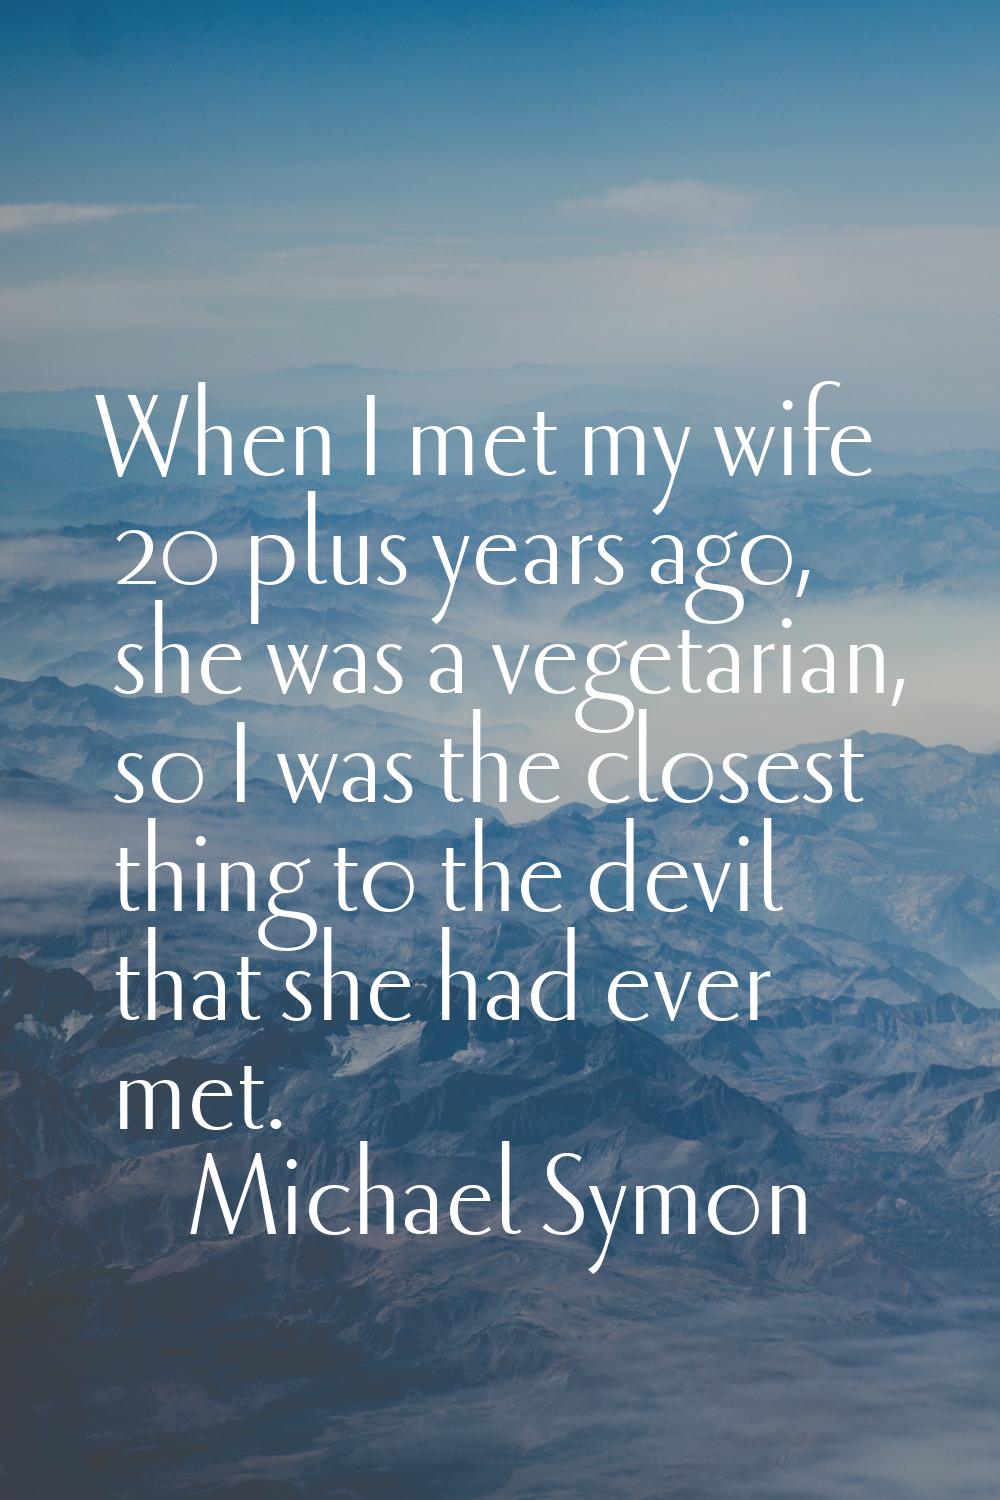 When I met my wife 20 plus years ago, she was a vegetarian, so I was the closest thing to the devil